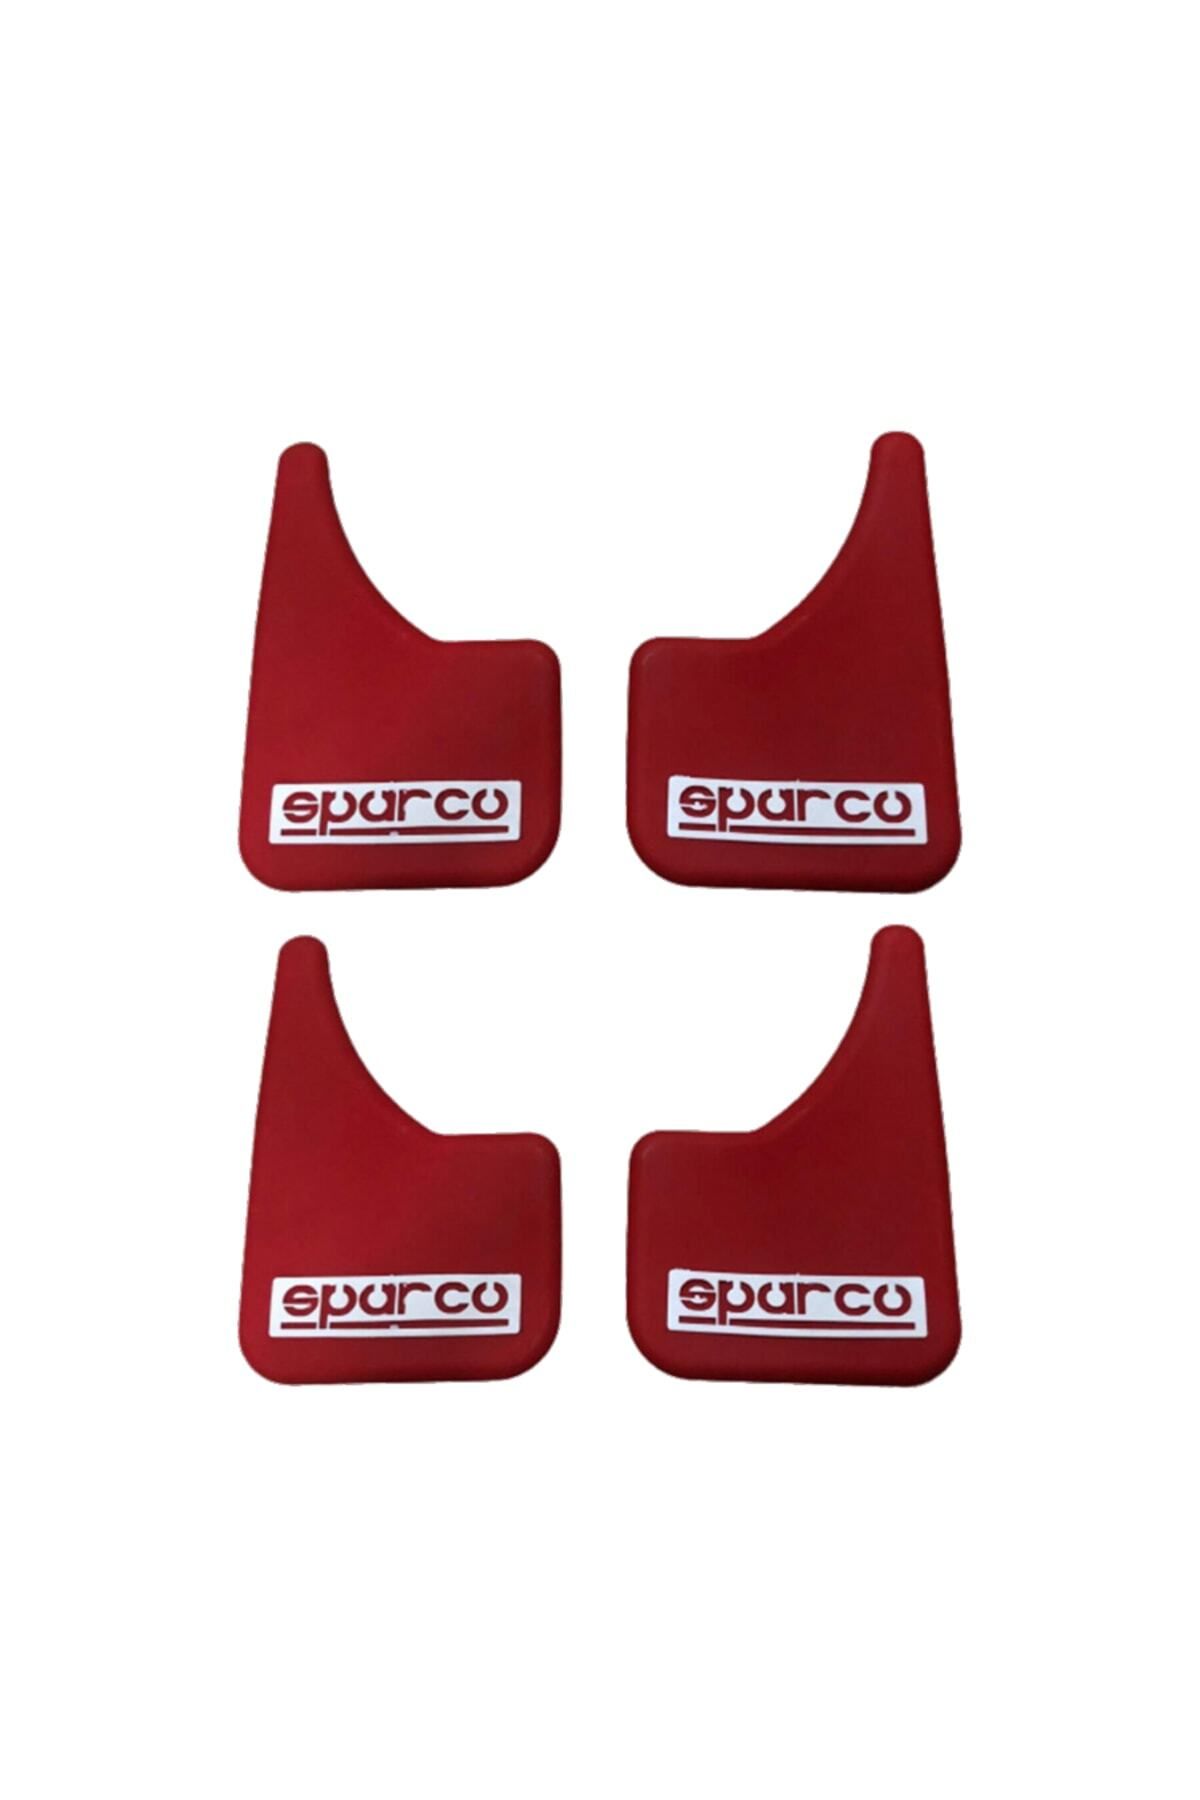 Sparco Red Universal Dust Cover Car Mud Covers 4 Pieces - Trendyol